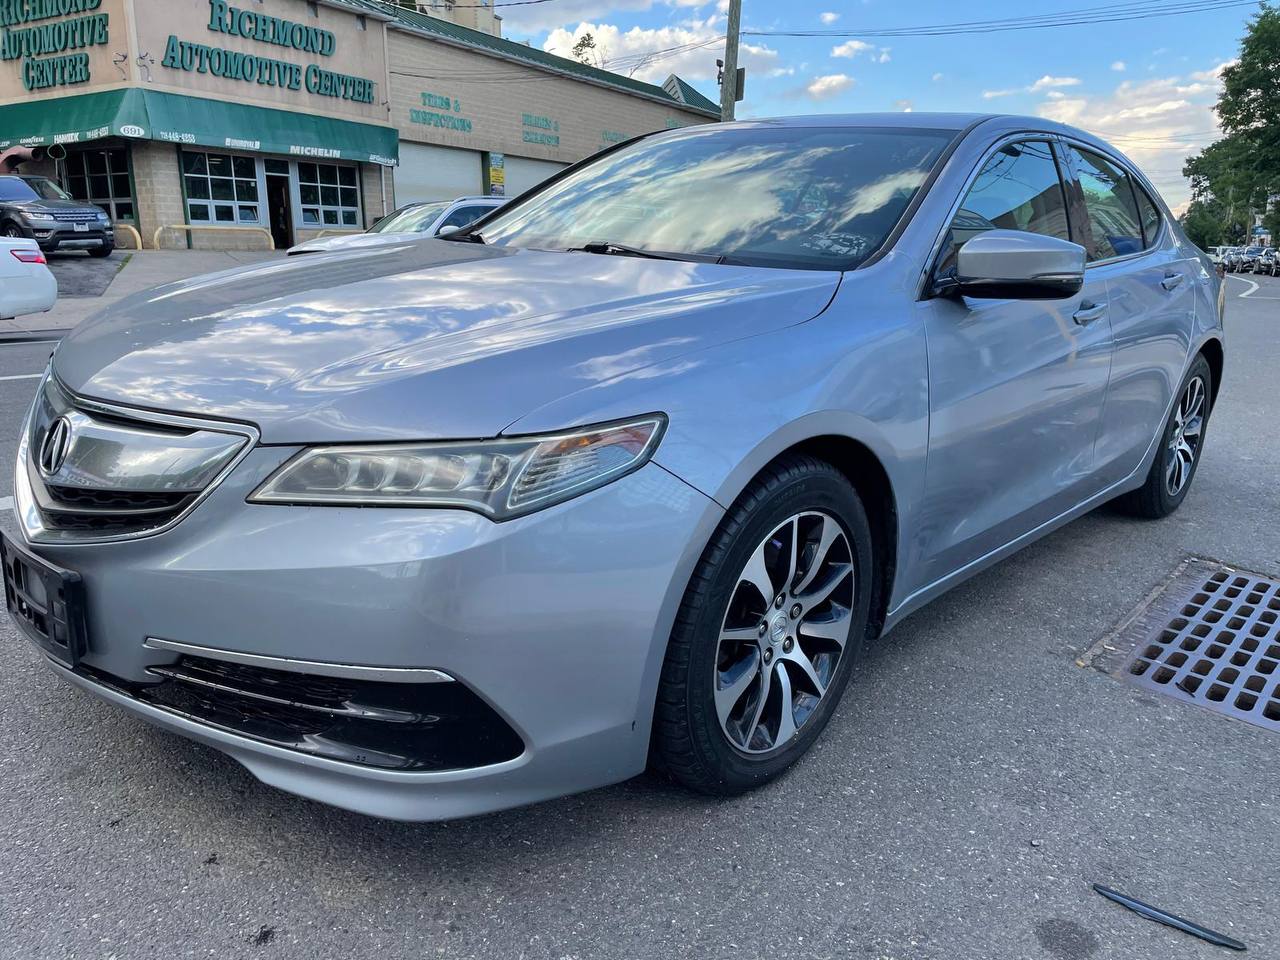 Used Car - 2016 Acura TLX for Sale in Staten Island, NY